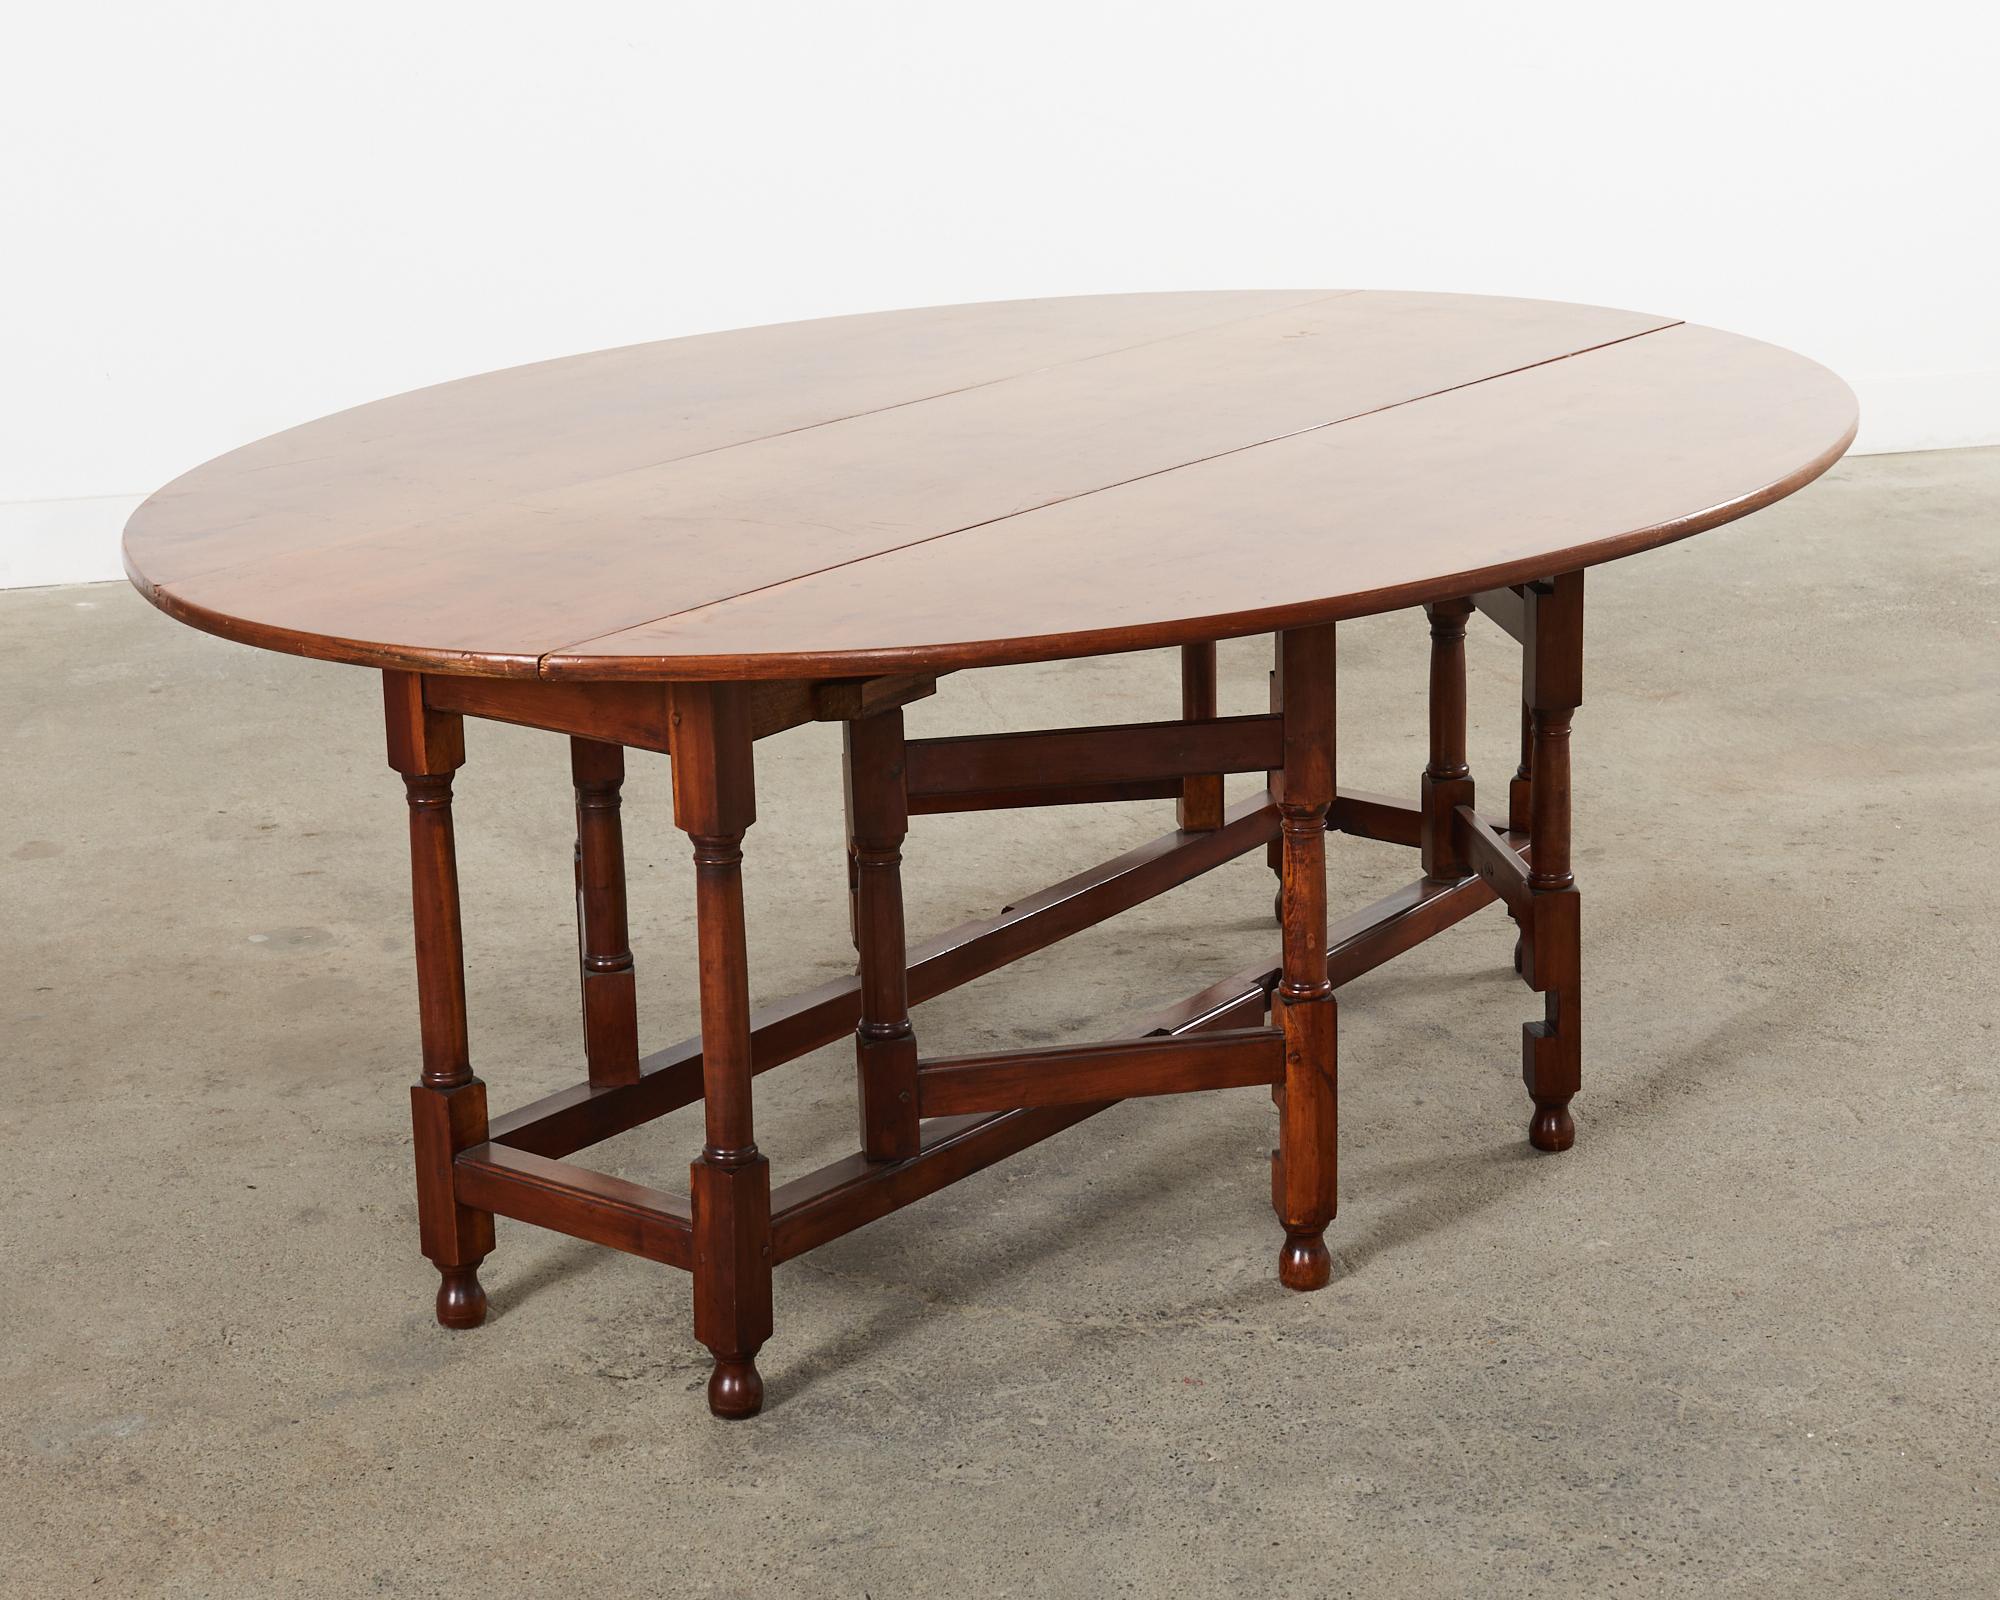 Dennis and Leen Georgian Style Drop-leaf Oval Dining Table  In Distressed Condition For Sale In Rio Vista, CA